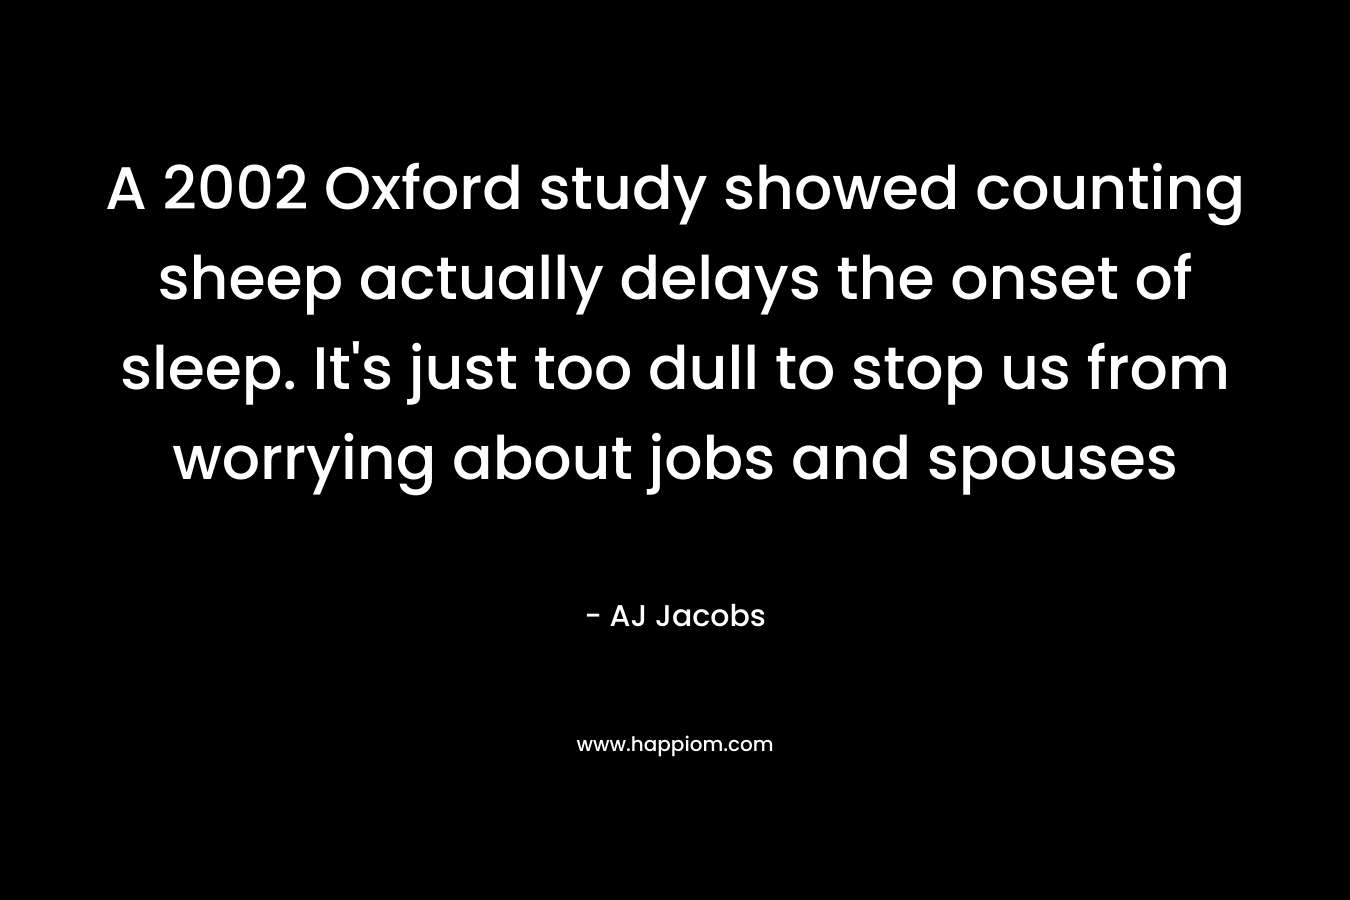 A 2002 Oxford study showed counting sheep actually delays the onset of sleep. It’s just too dull to stop us from worrying about jobs and spouses – AJ Jacobs